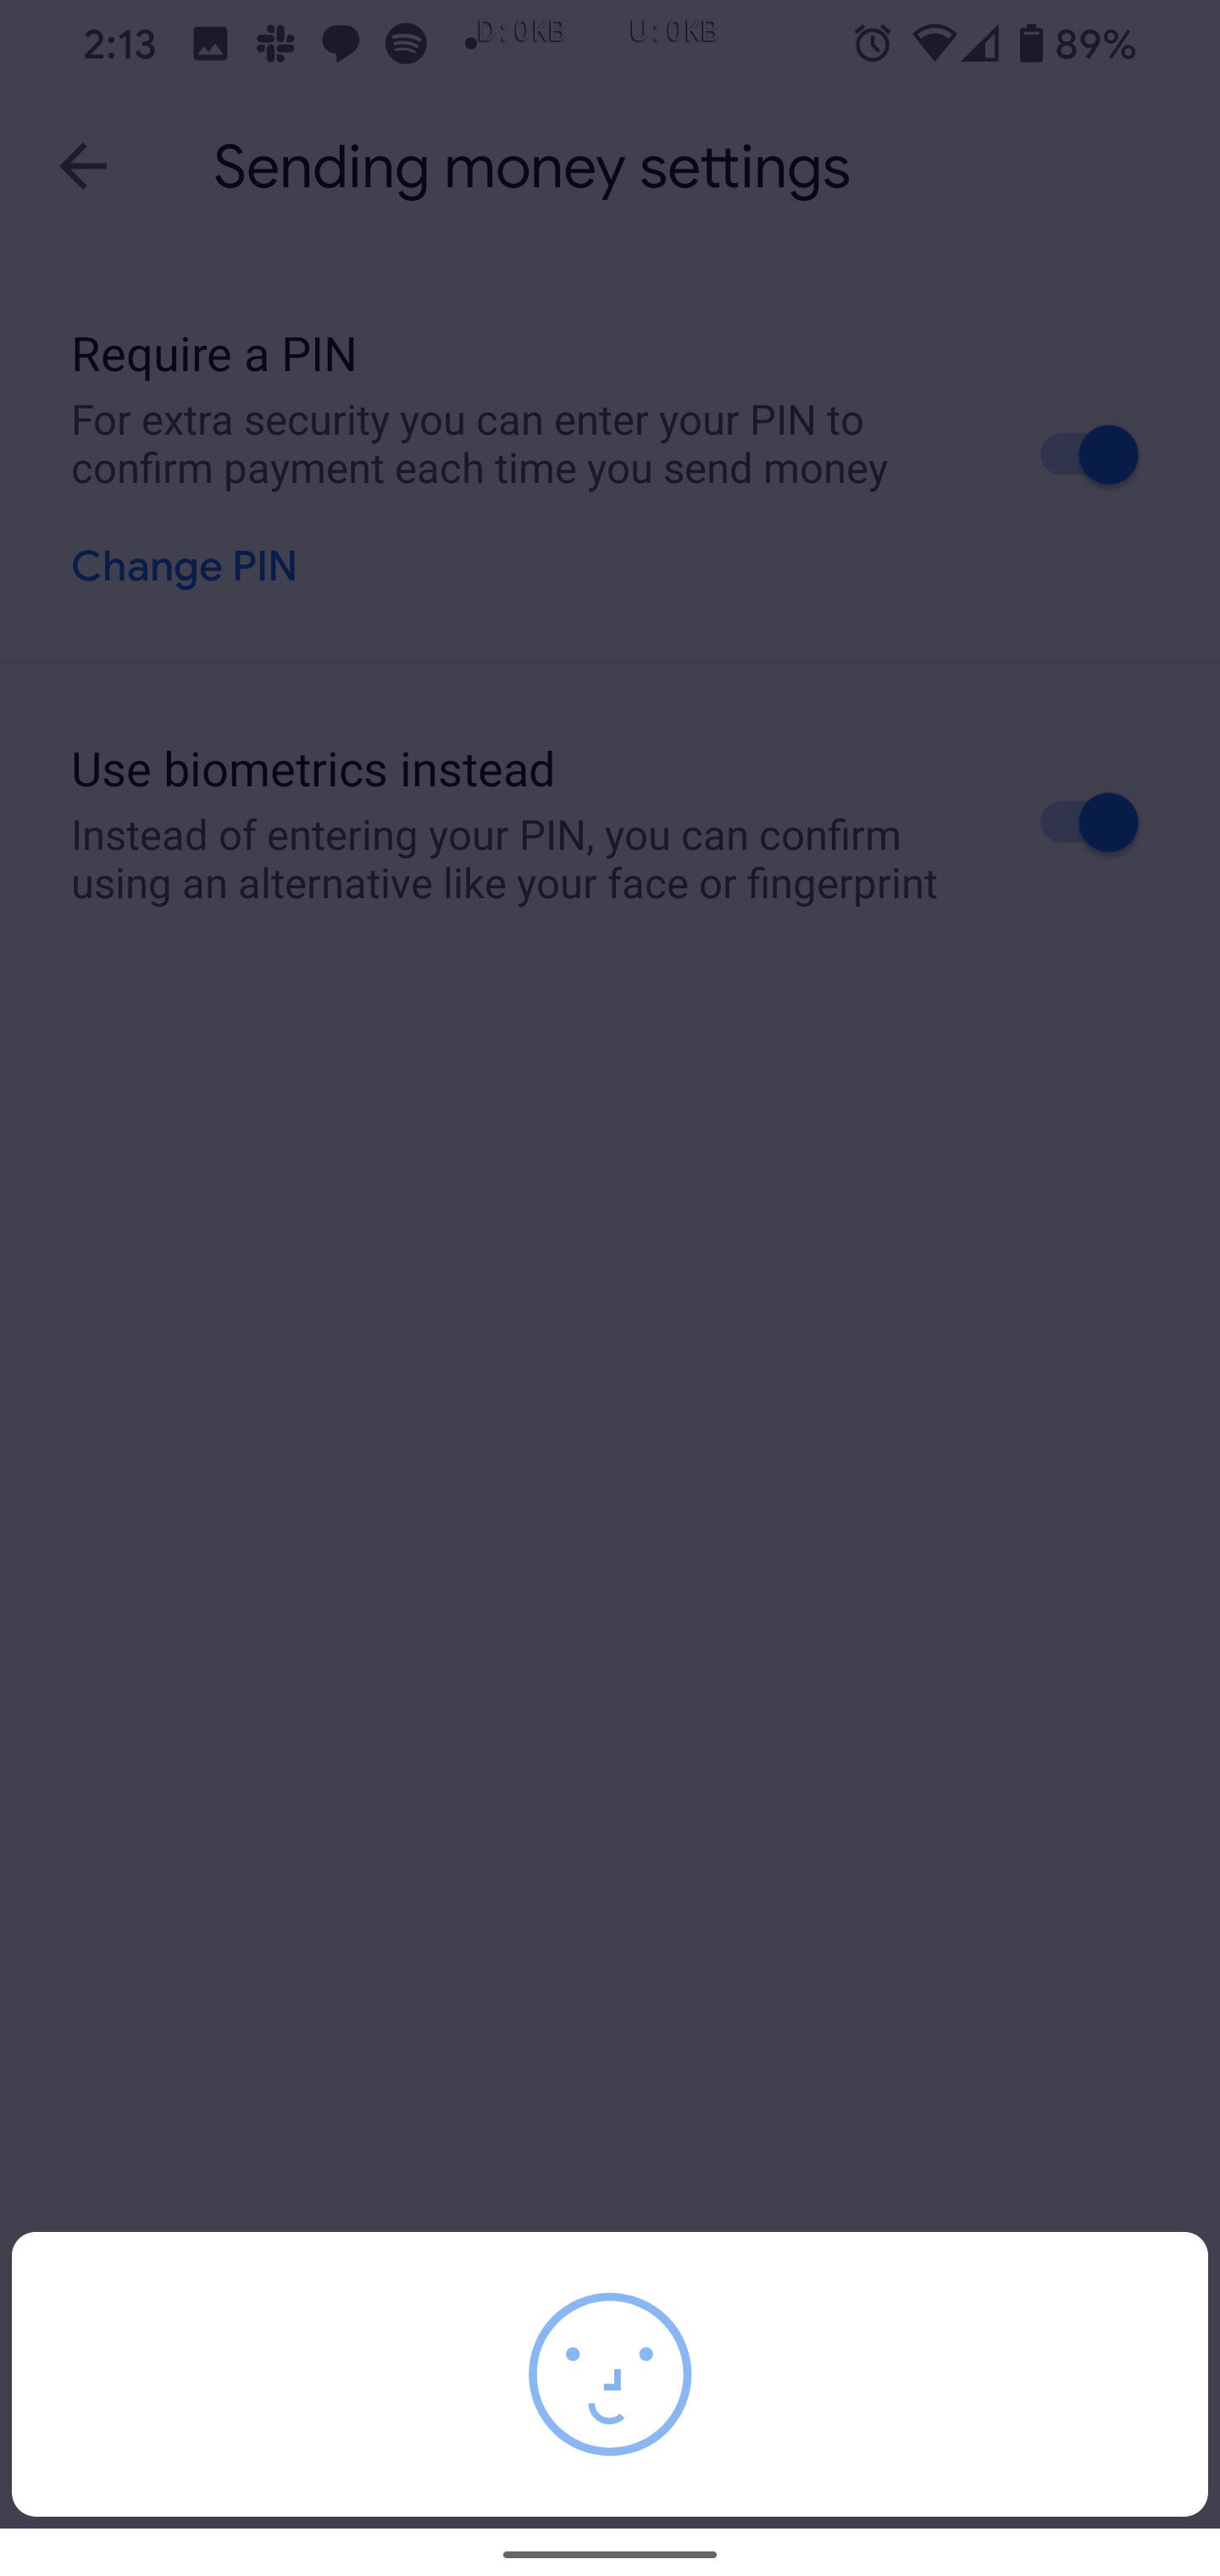 Google Pay adds biometric authentication for money transfers